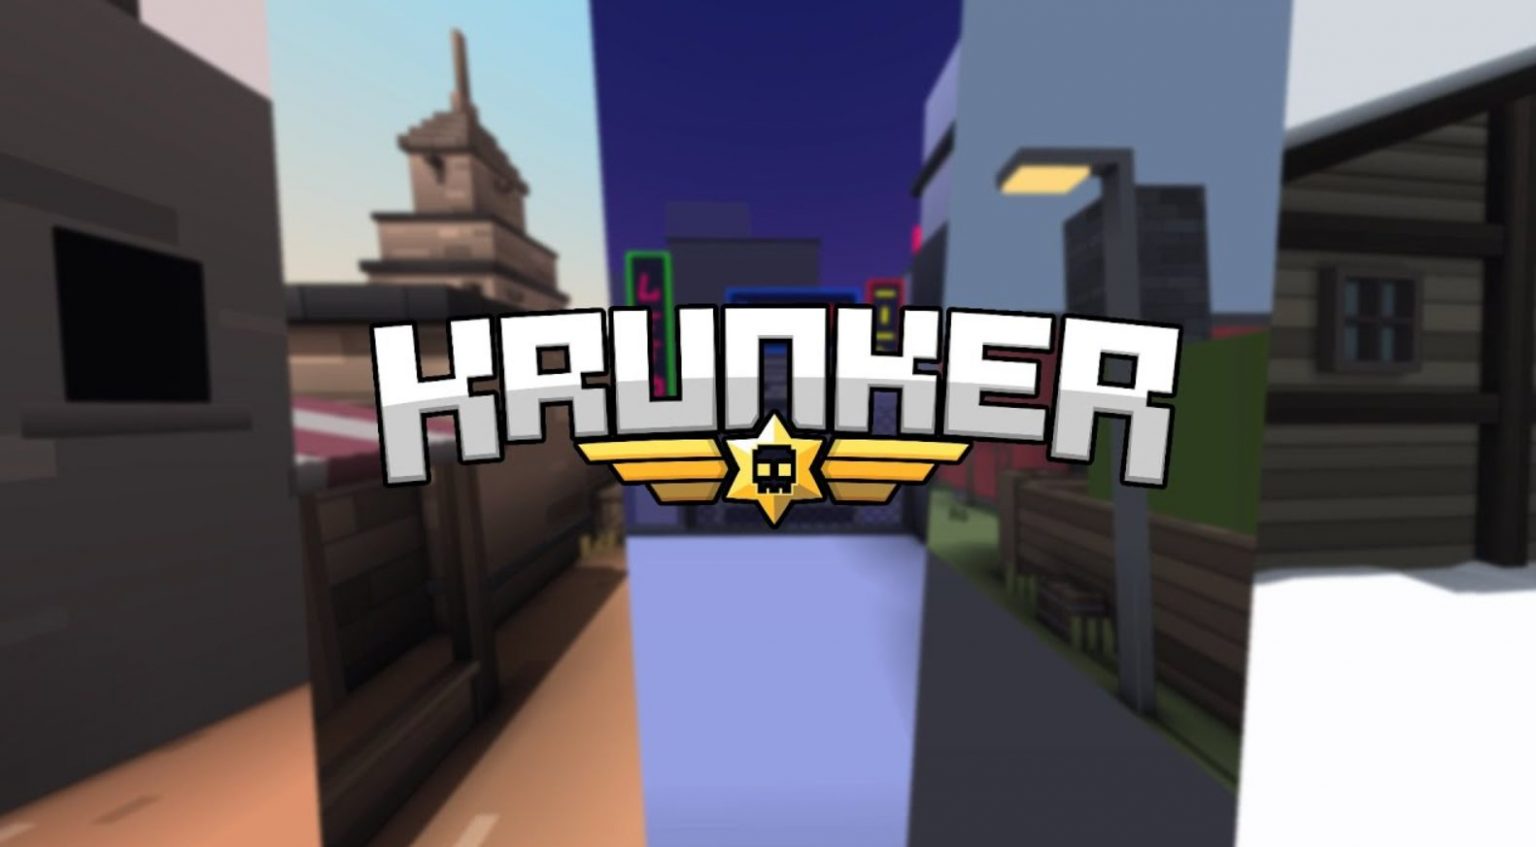 Krunker PC Game Latest Version Free Download